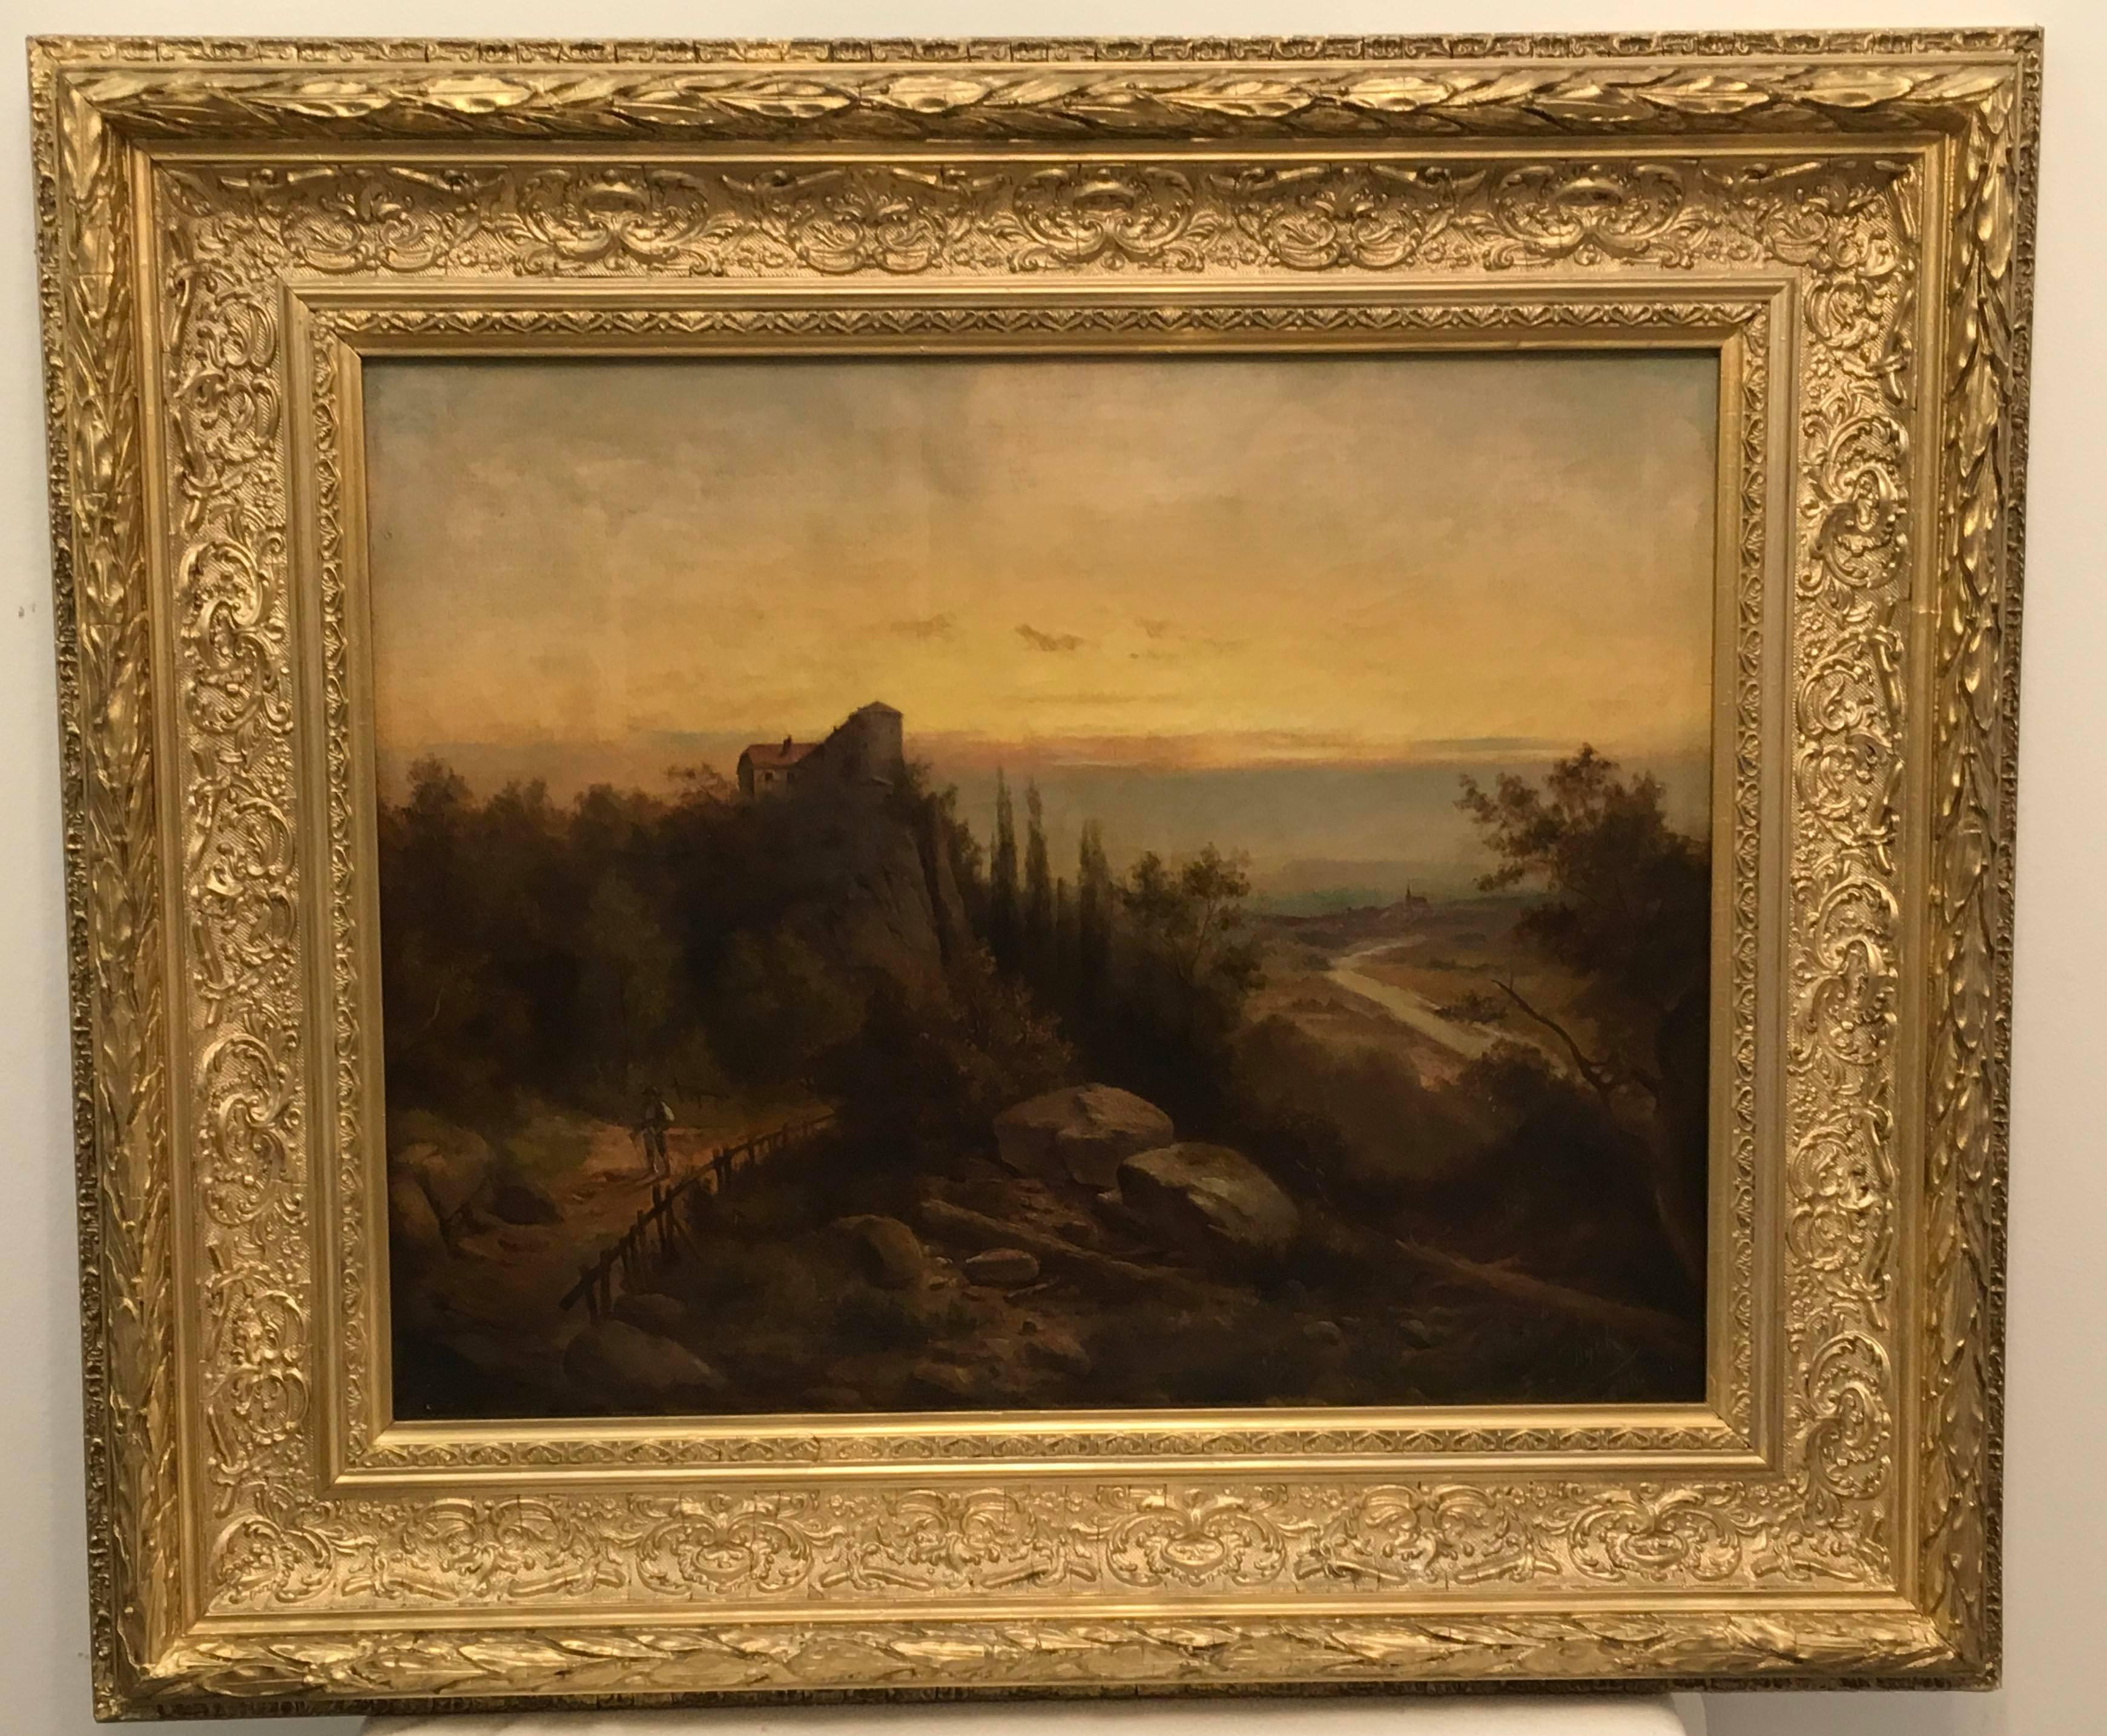 Late 19th Century Landscape Painting by F. J. Dyck from 1898